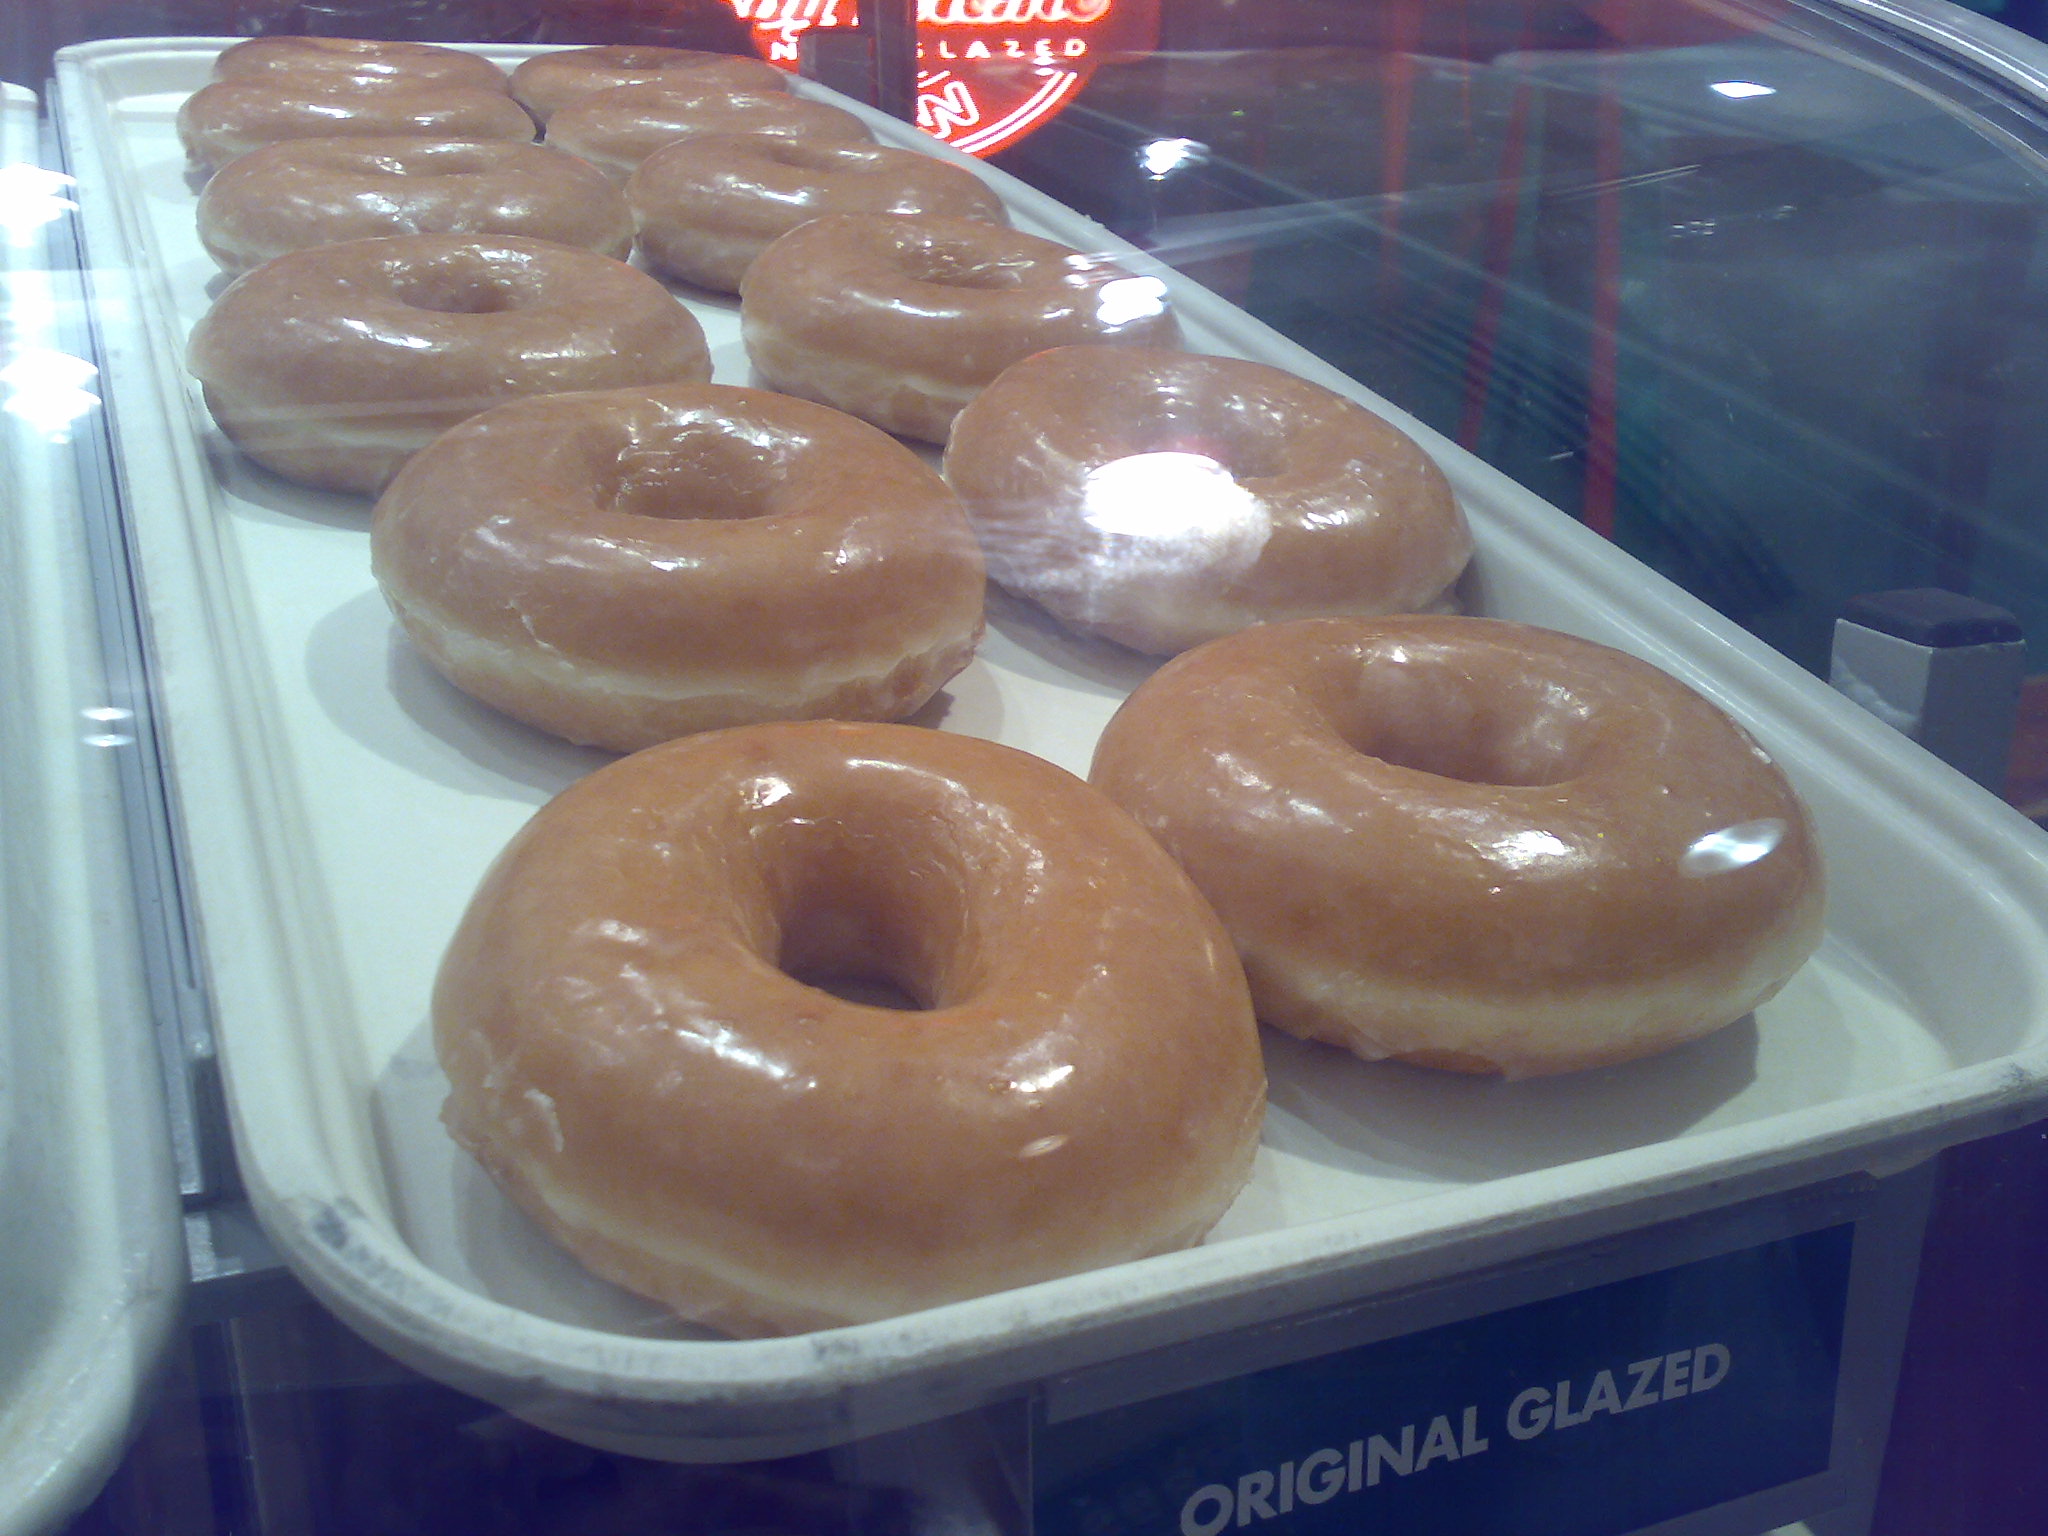 glazed donuts are shown in a display case